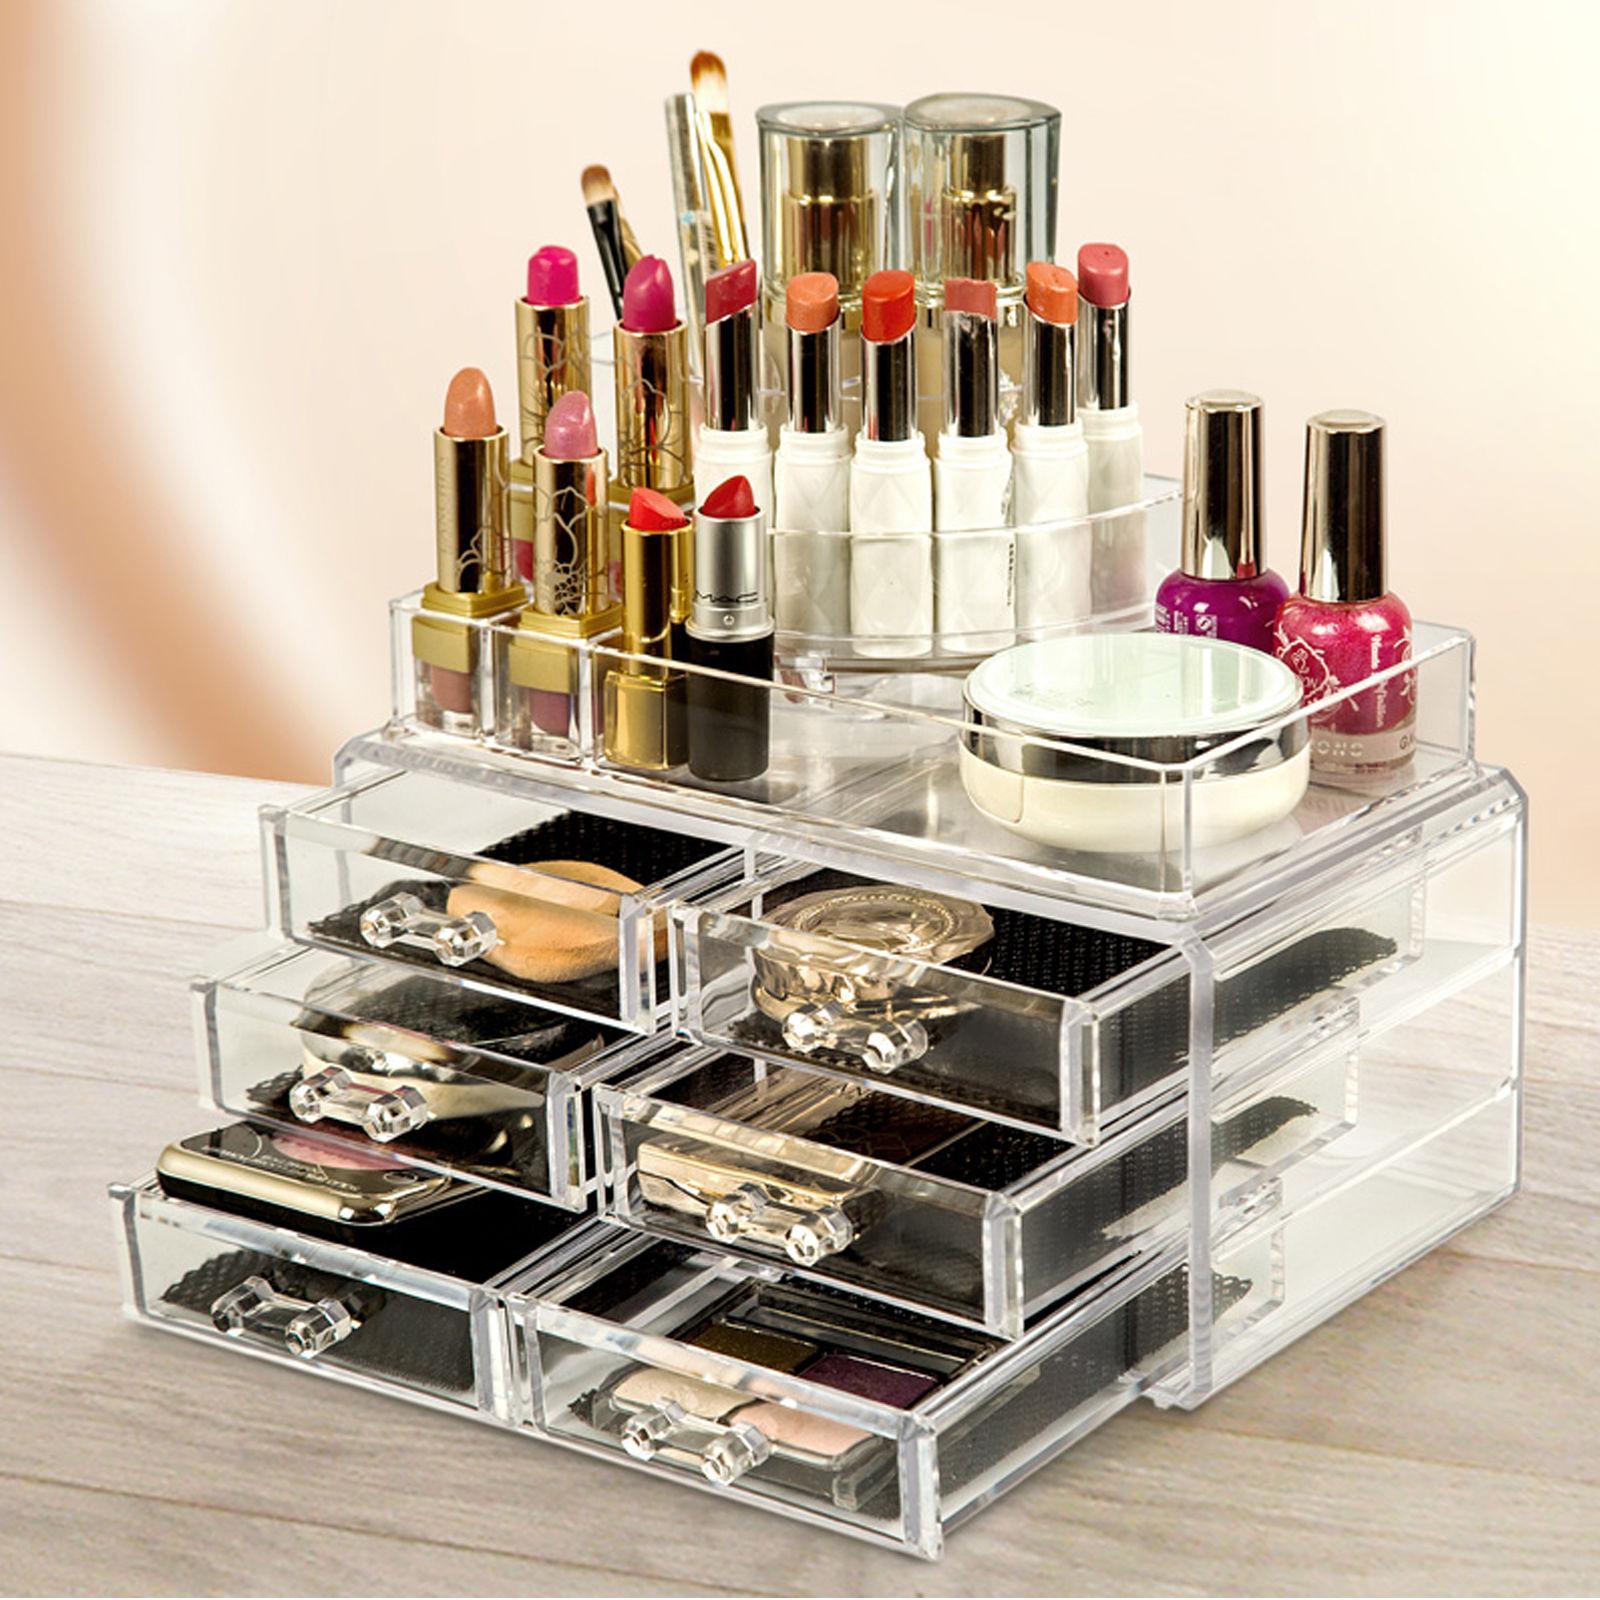 COSMETIC ORGANIZER MAKEUP STORAGE BOX LIPSTICK HOLDER STAND MORE TOOLS